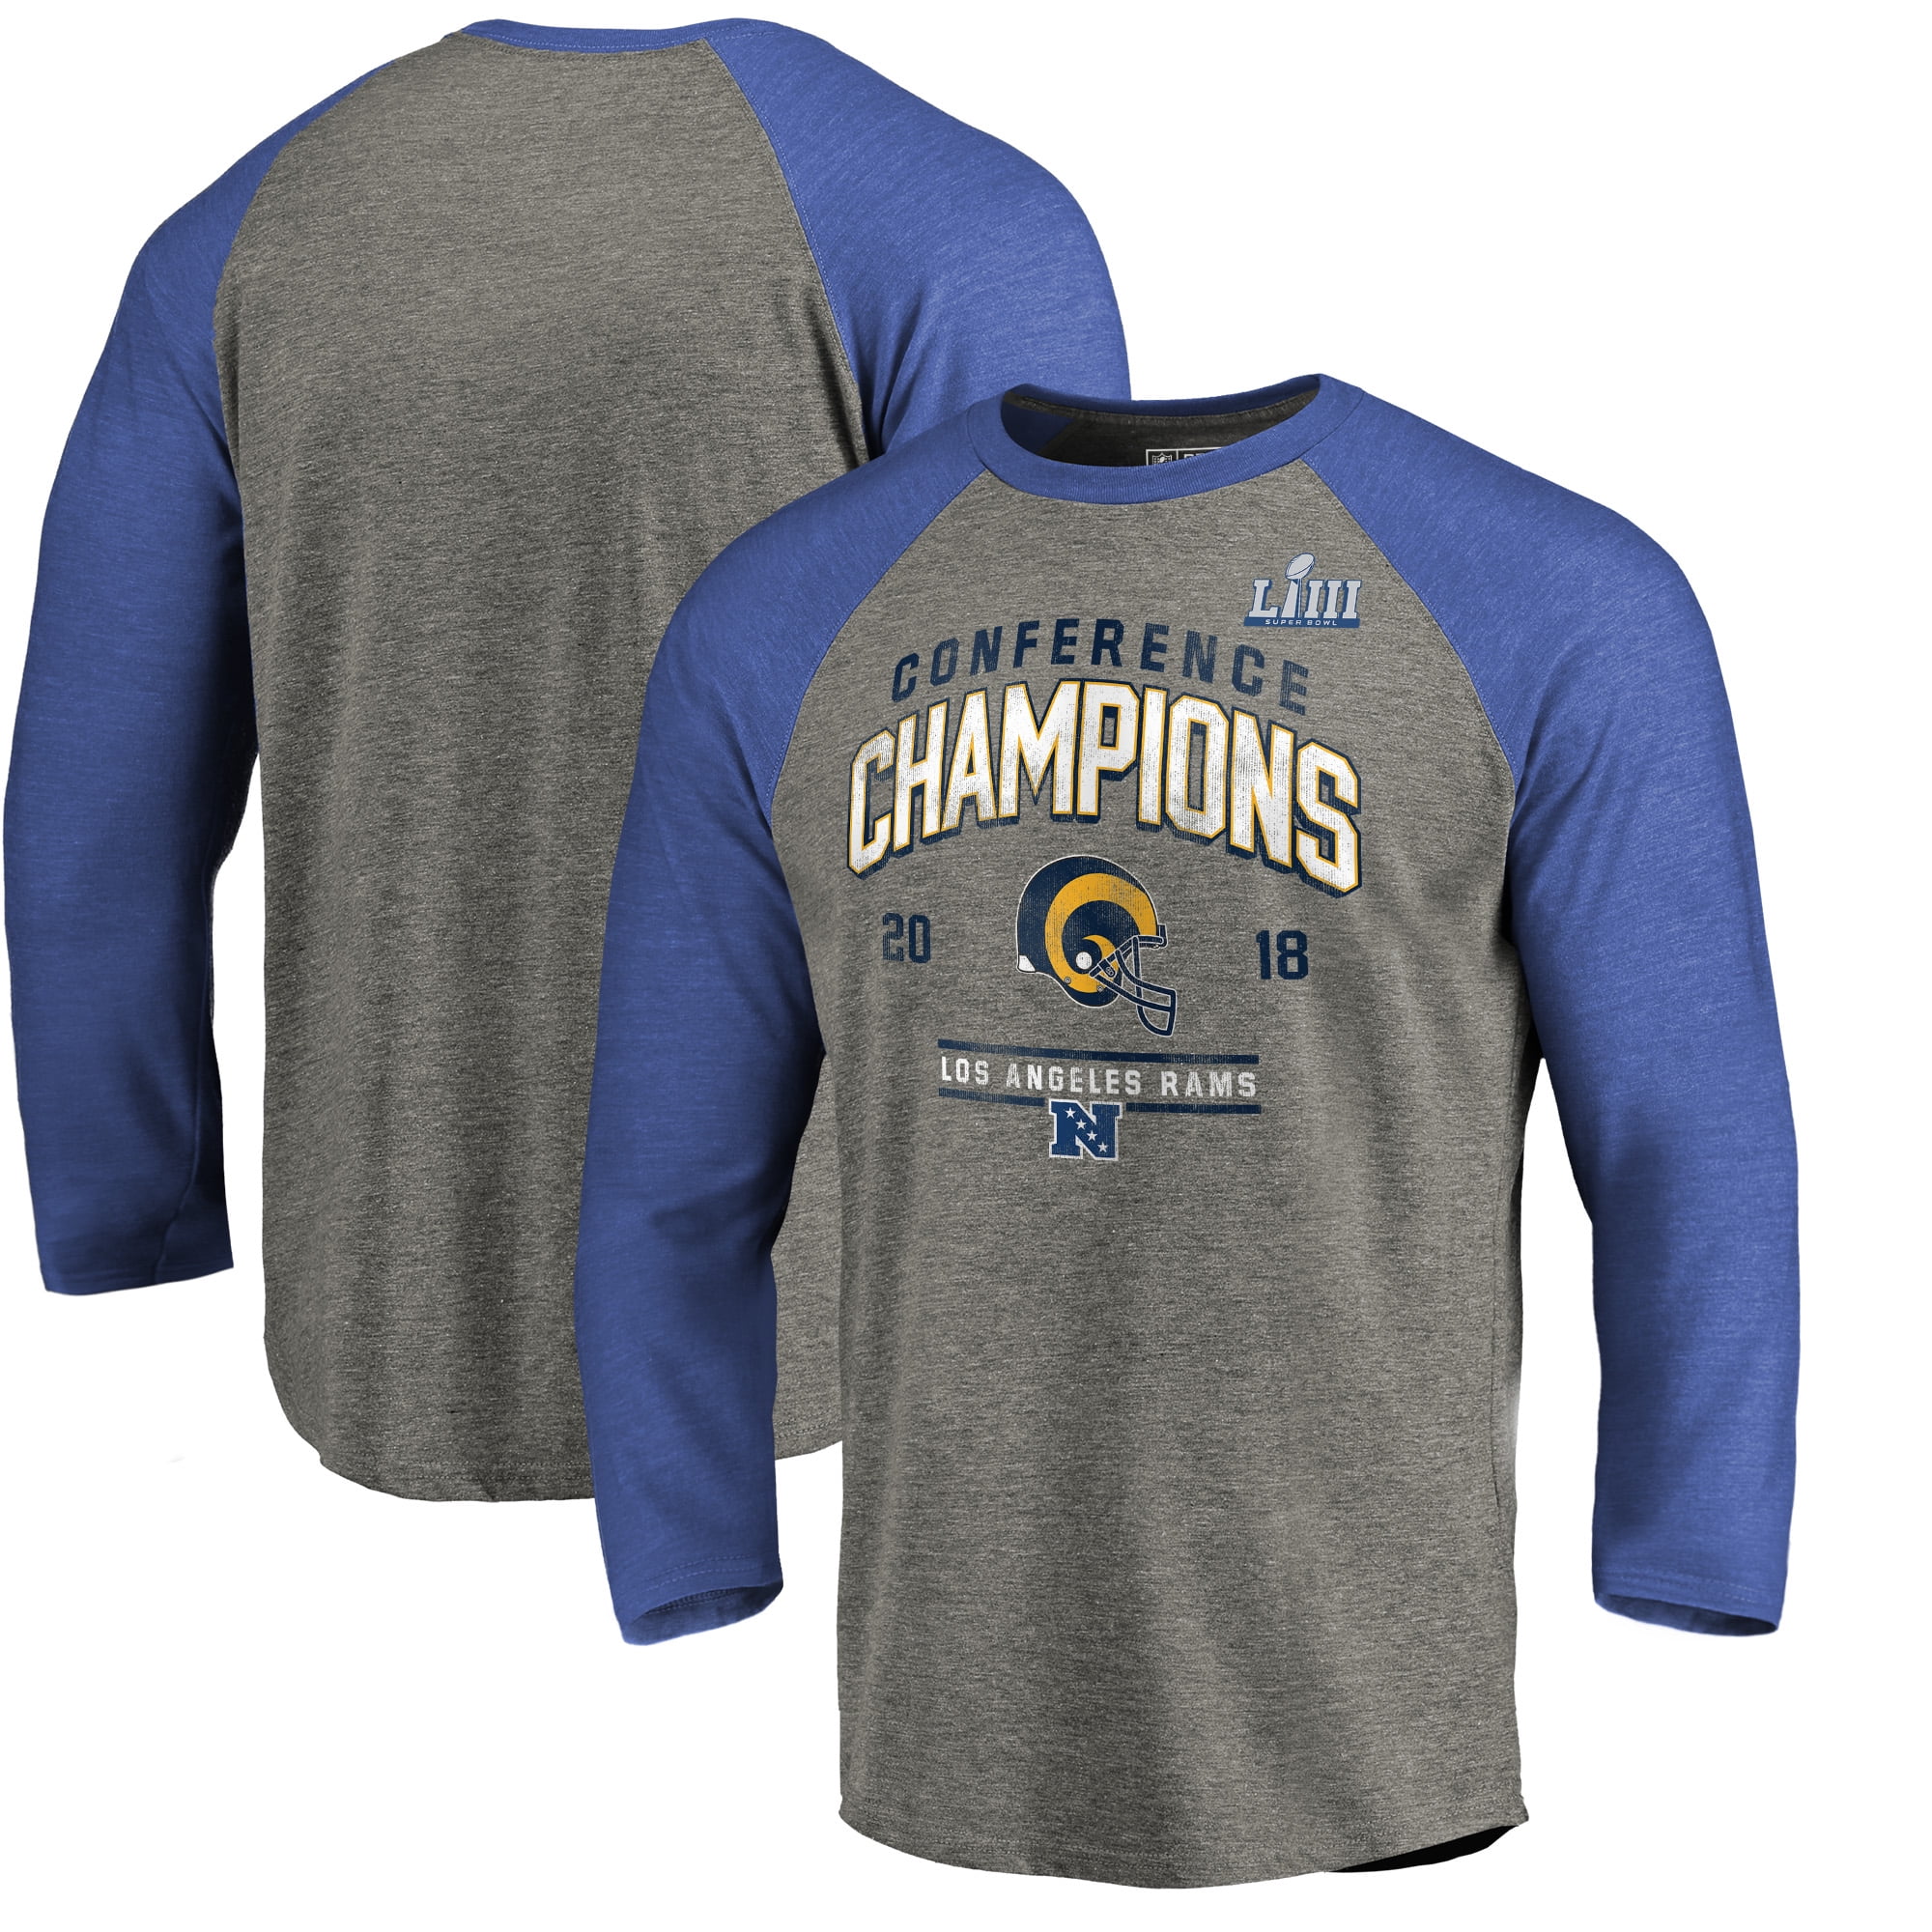 Giants nfc champions t-shirts in xxx